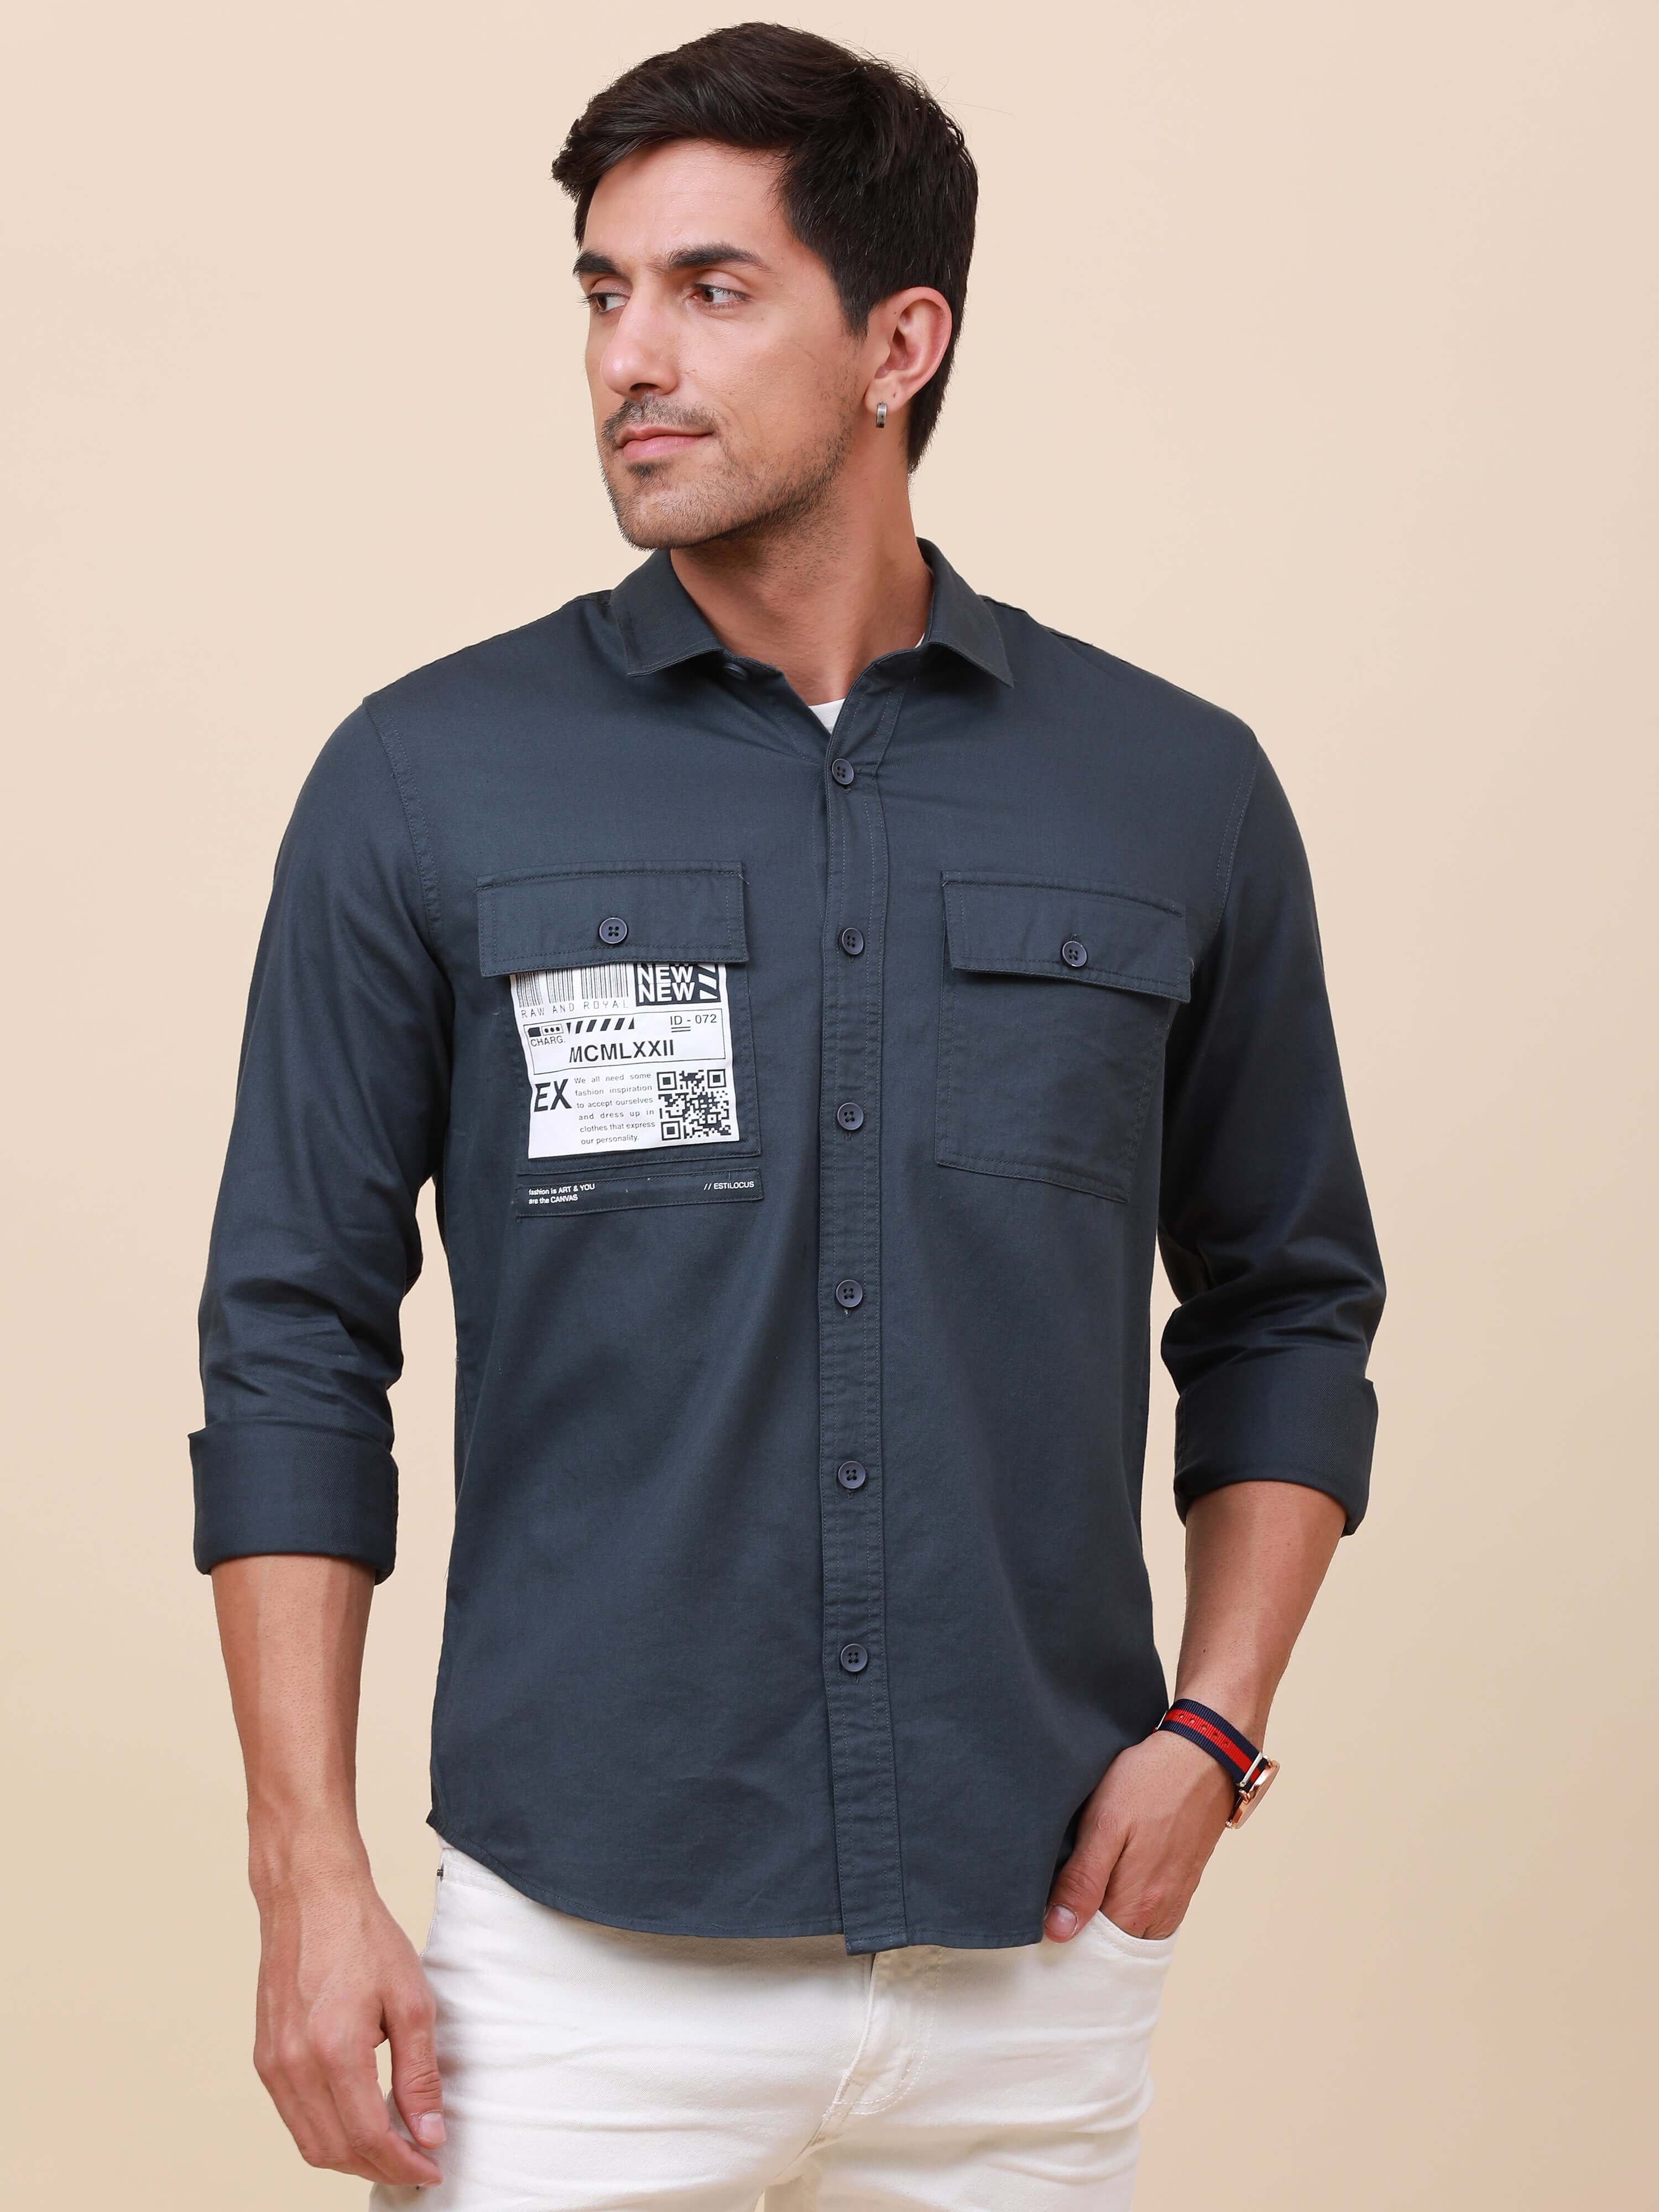 Navy Solid Double Pocket Shirt shop online at Estilocus. 100% Cotton ,Full-sleeve solid shirt Cut and sew placket Regular collar Double button edge cuff Double pocket Curved bottom hemline Finest printing at front placket. All double needle construction,